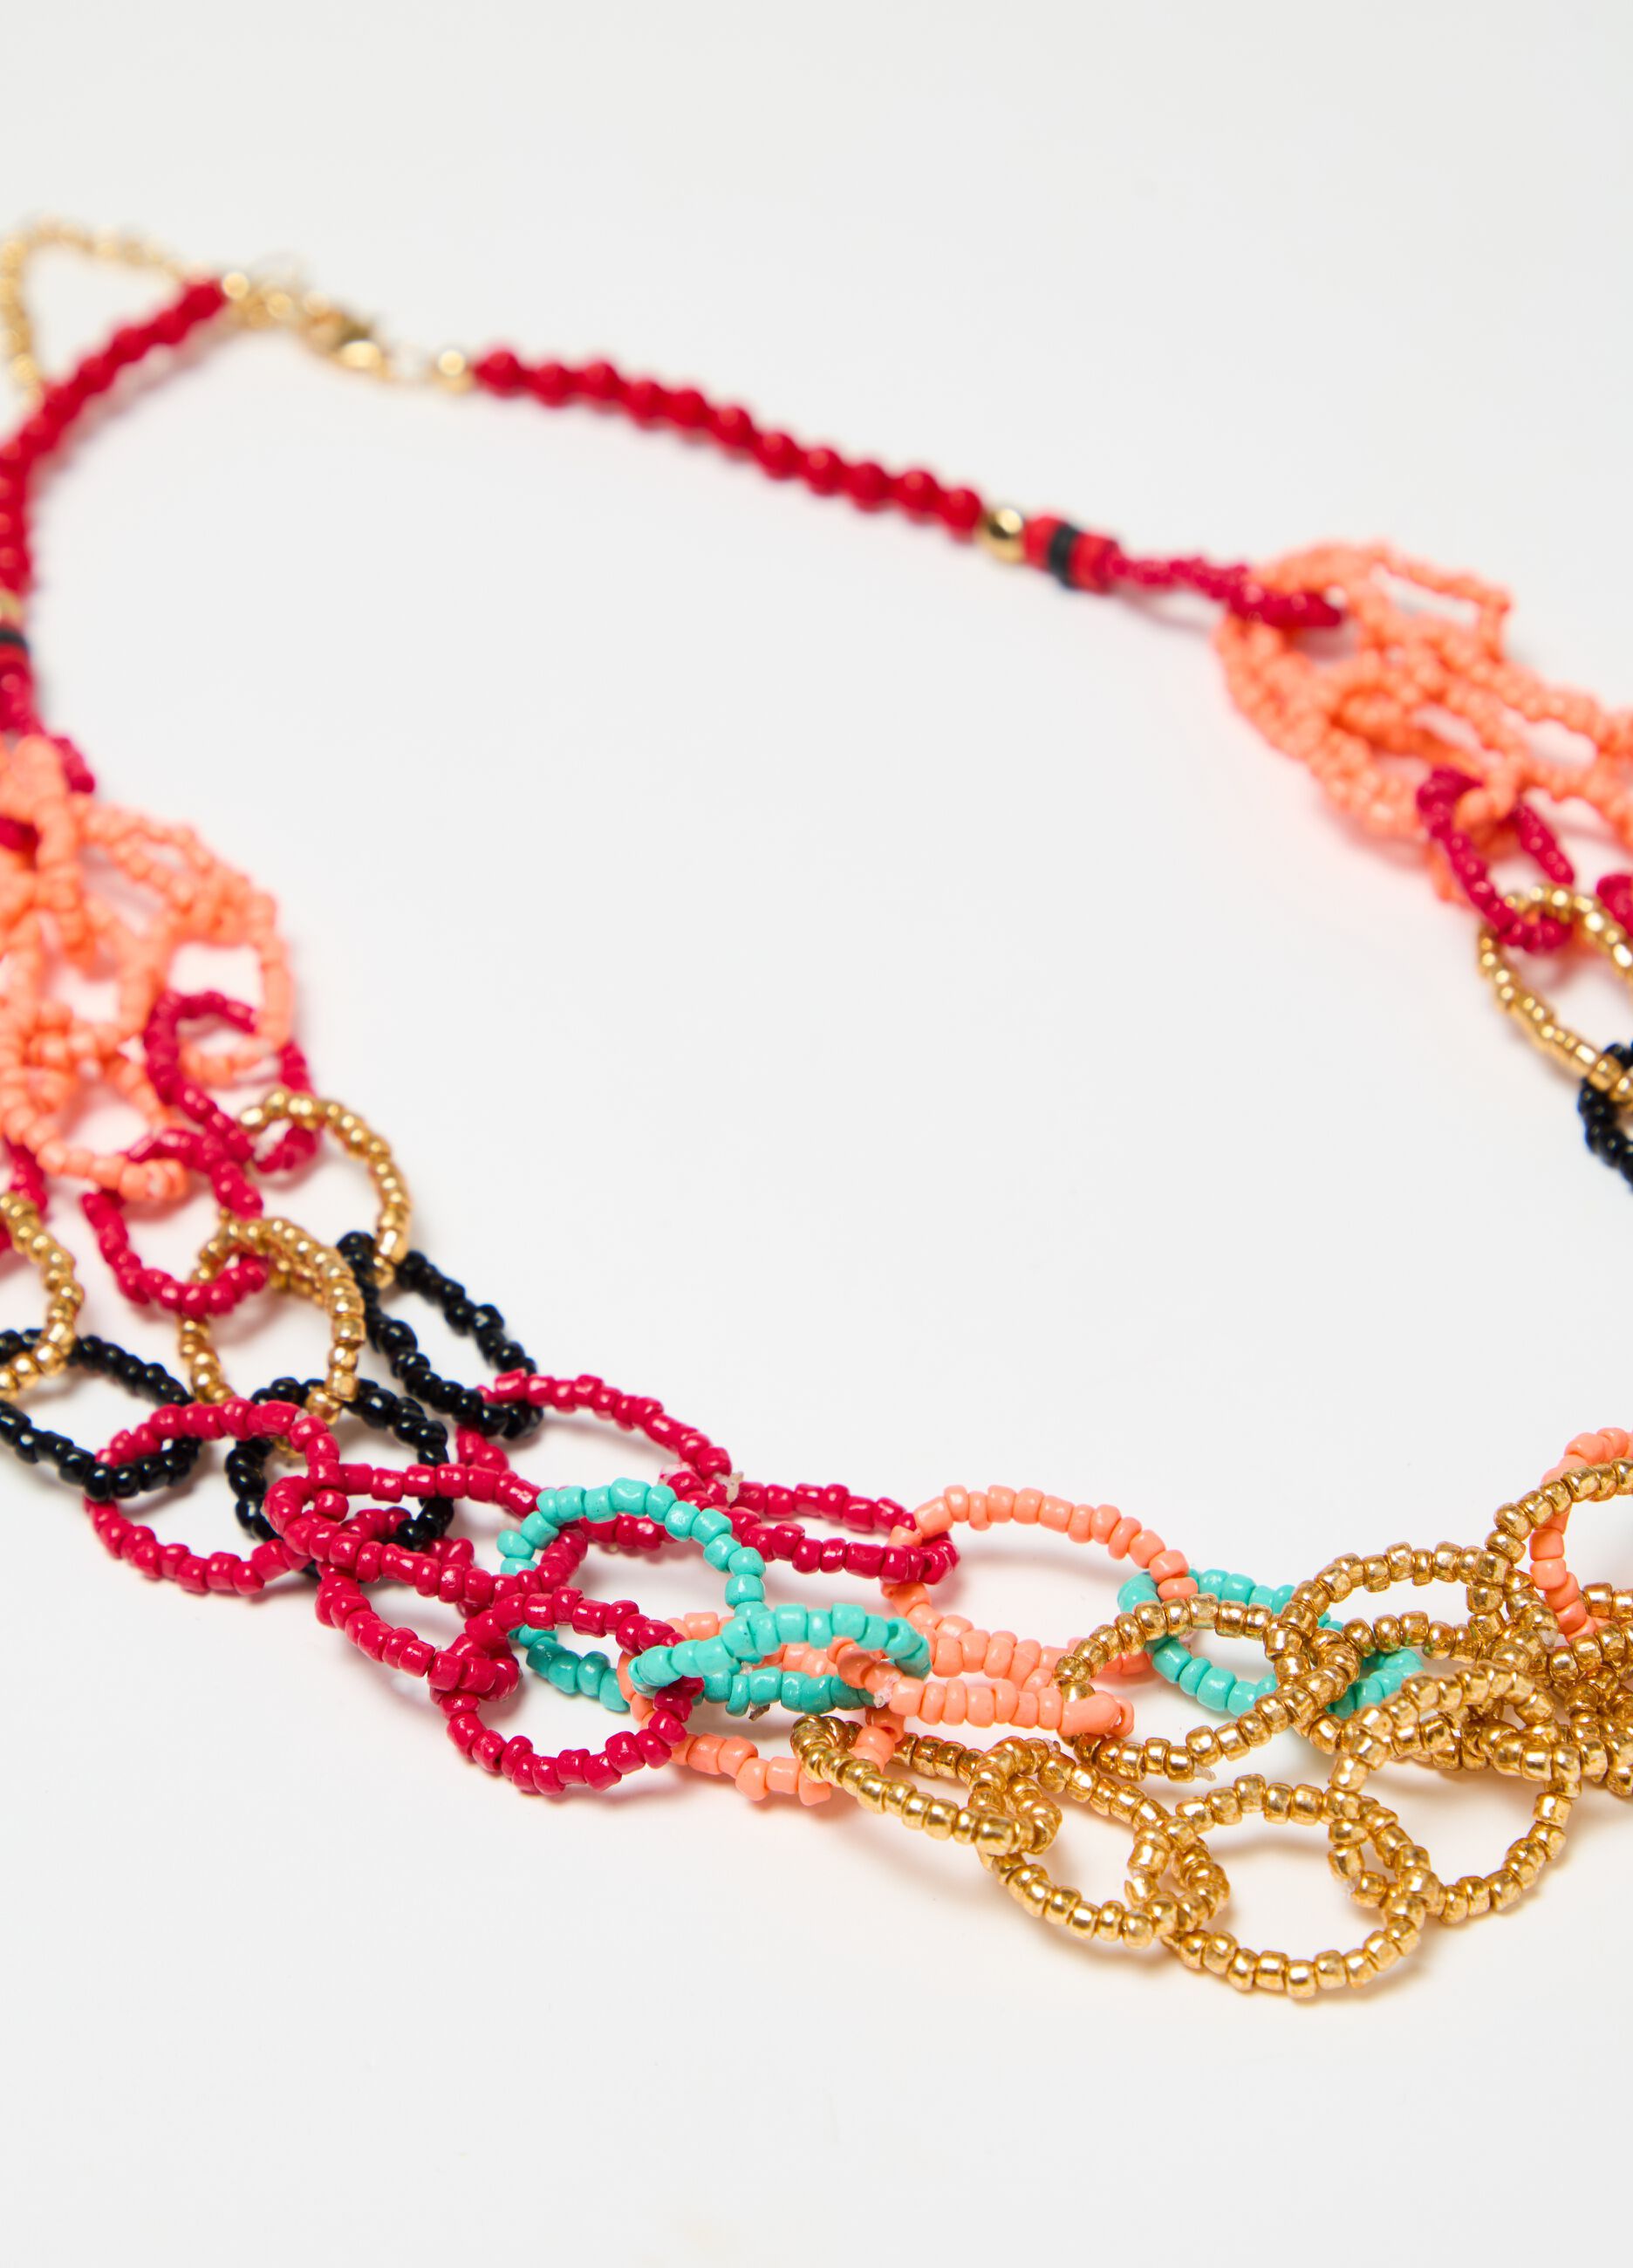 Chain necklace with multicoloured beads